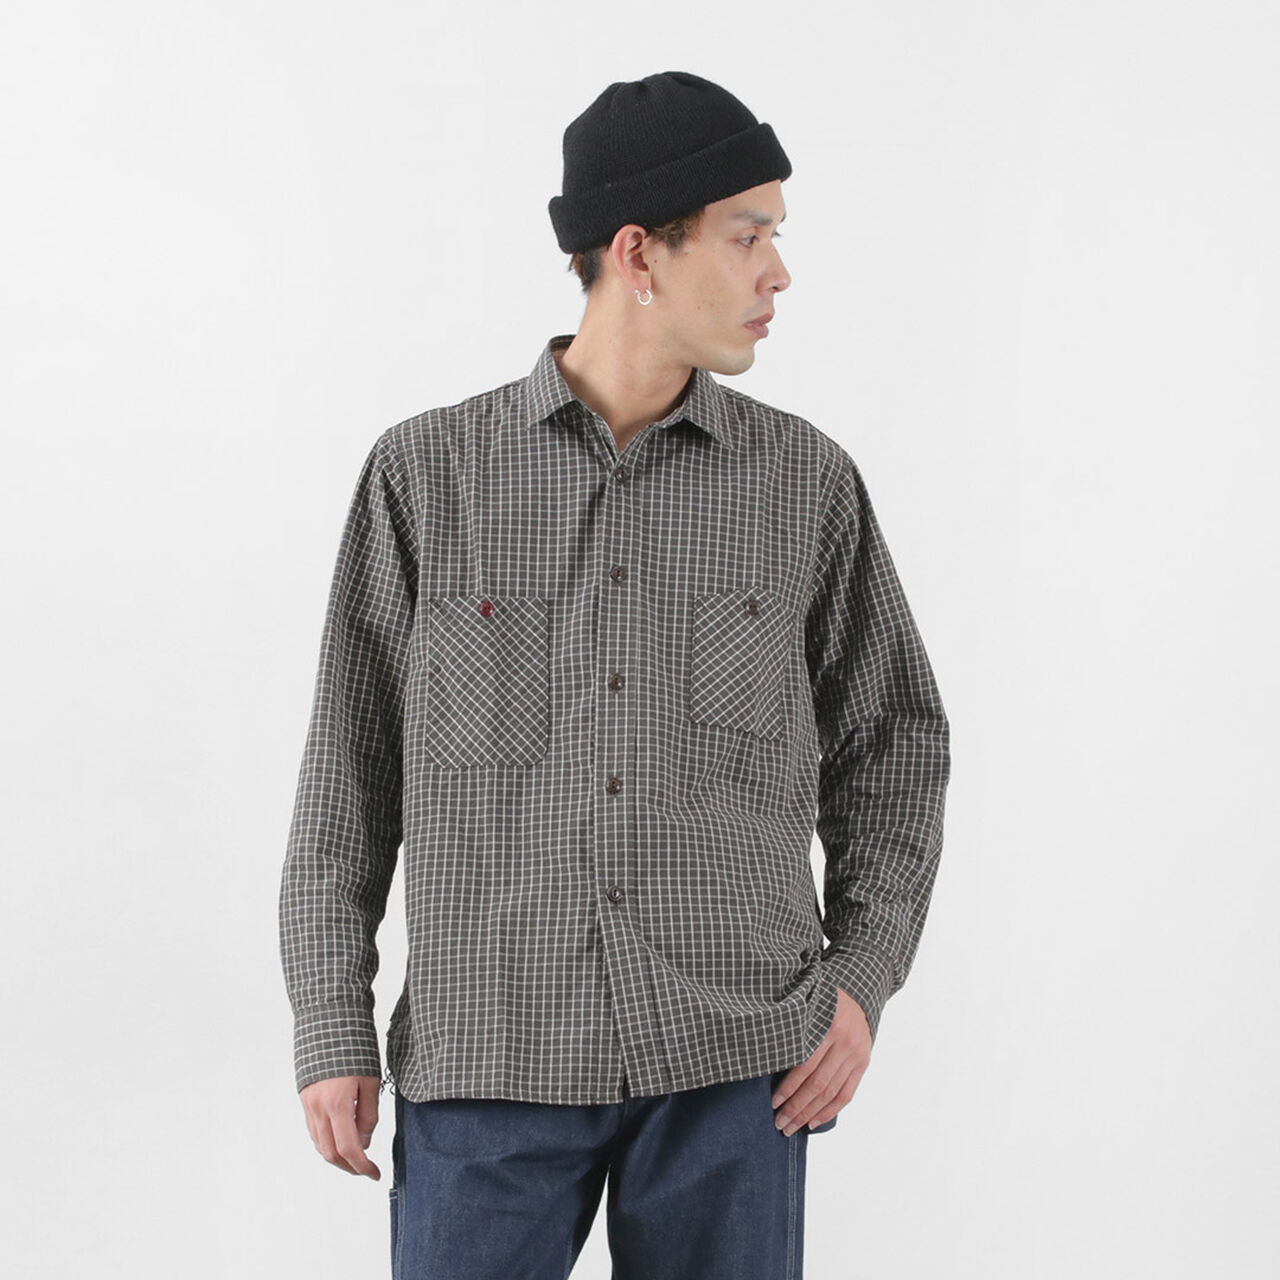 F3489 GRAPH CHECK WORK SHIRT,Charcoal, large image number 0